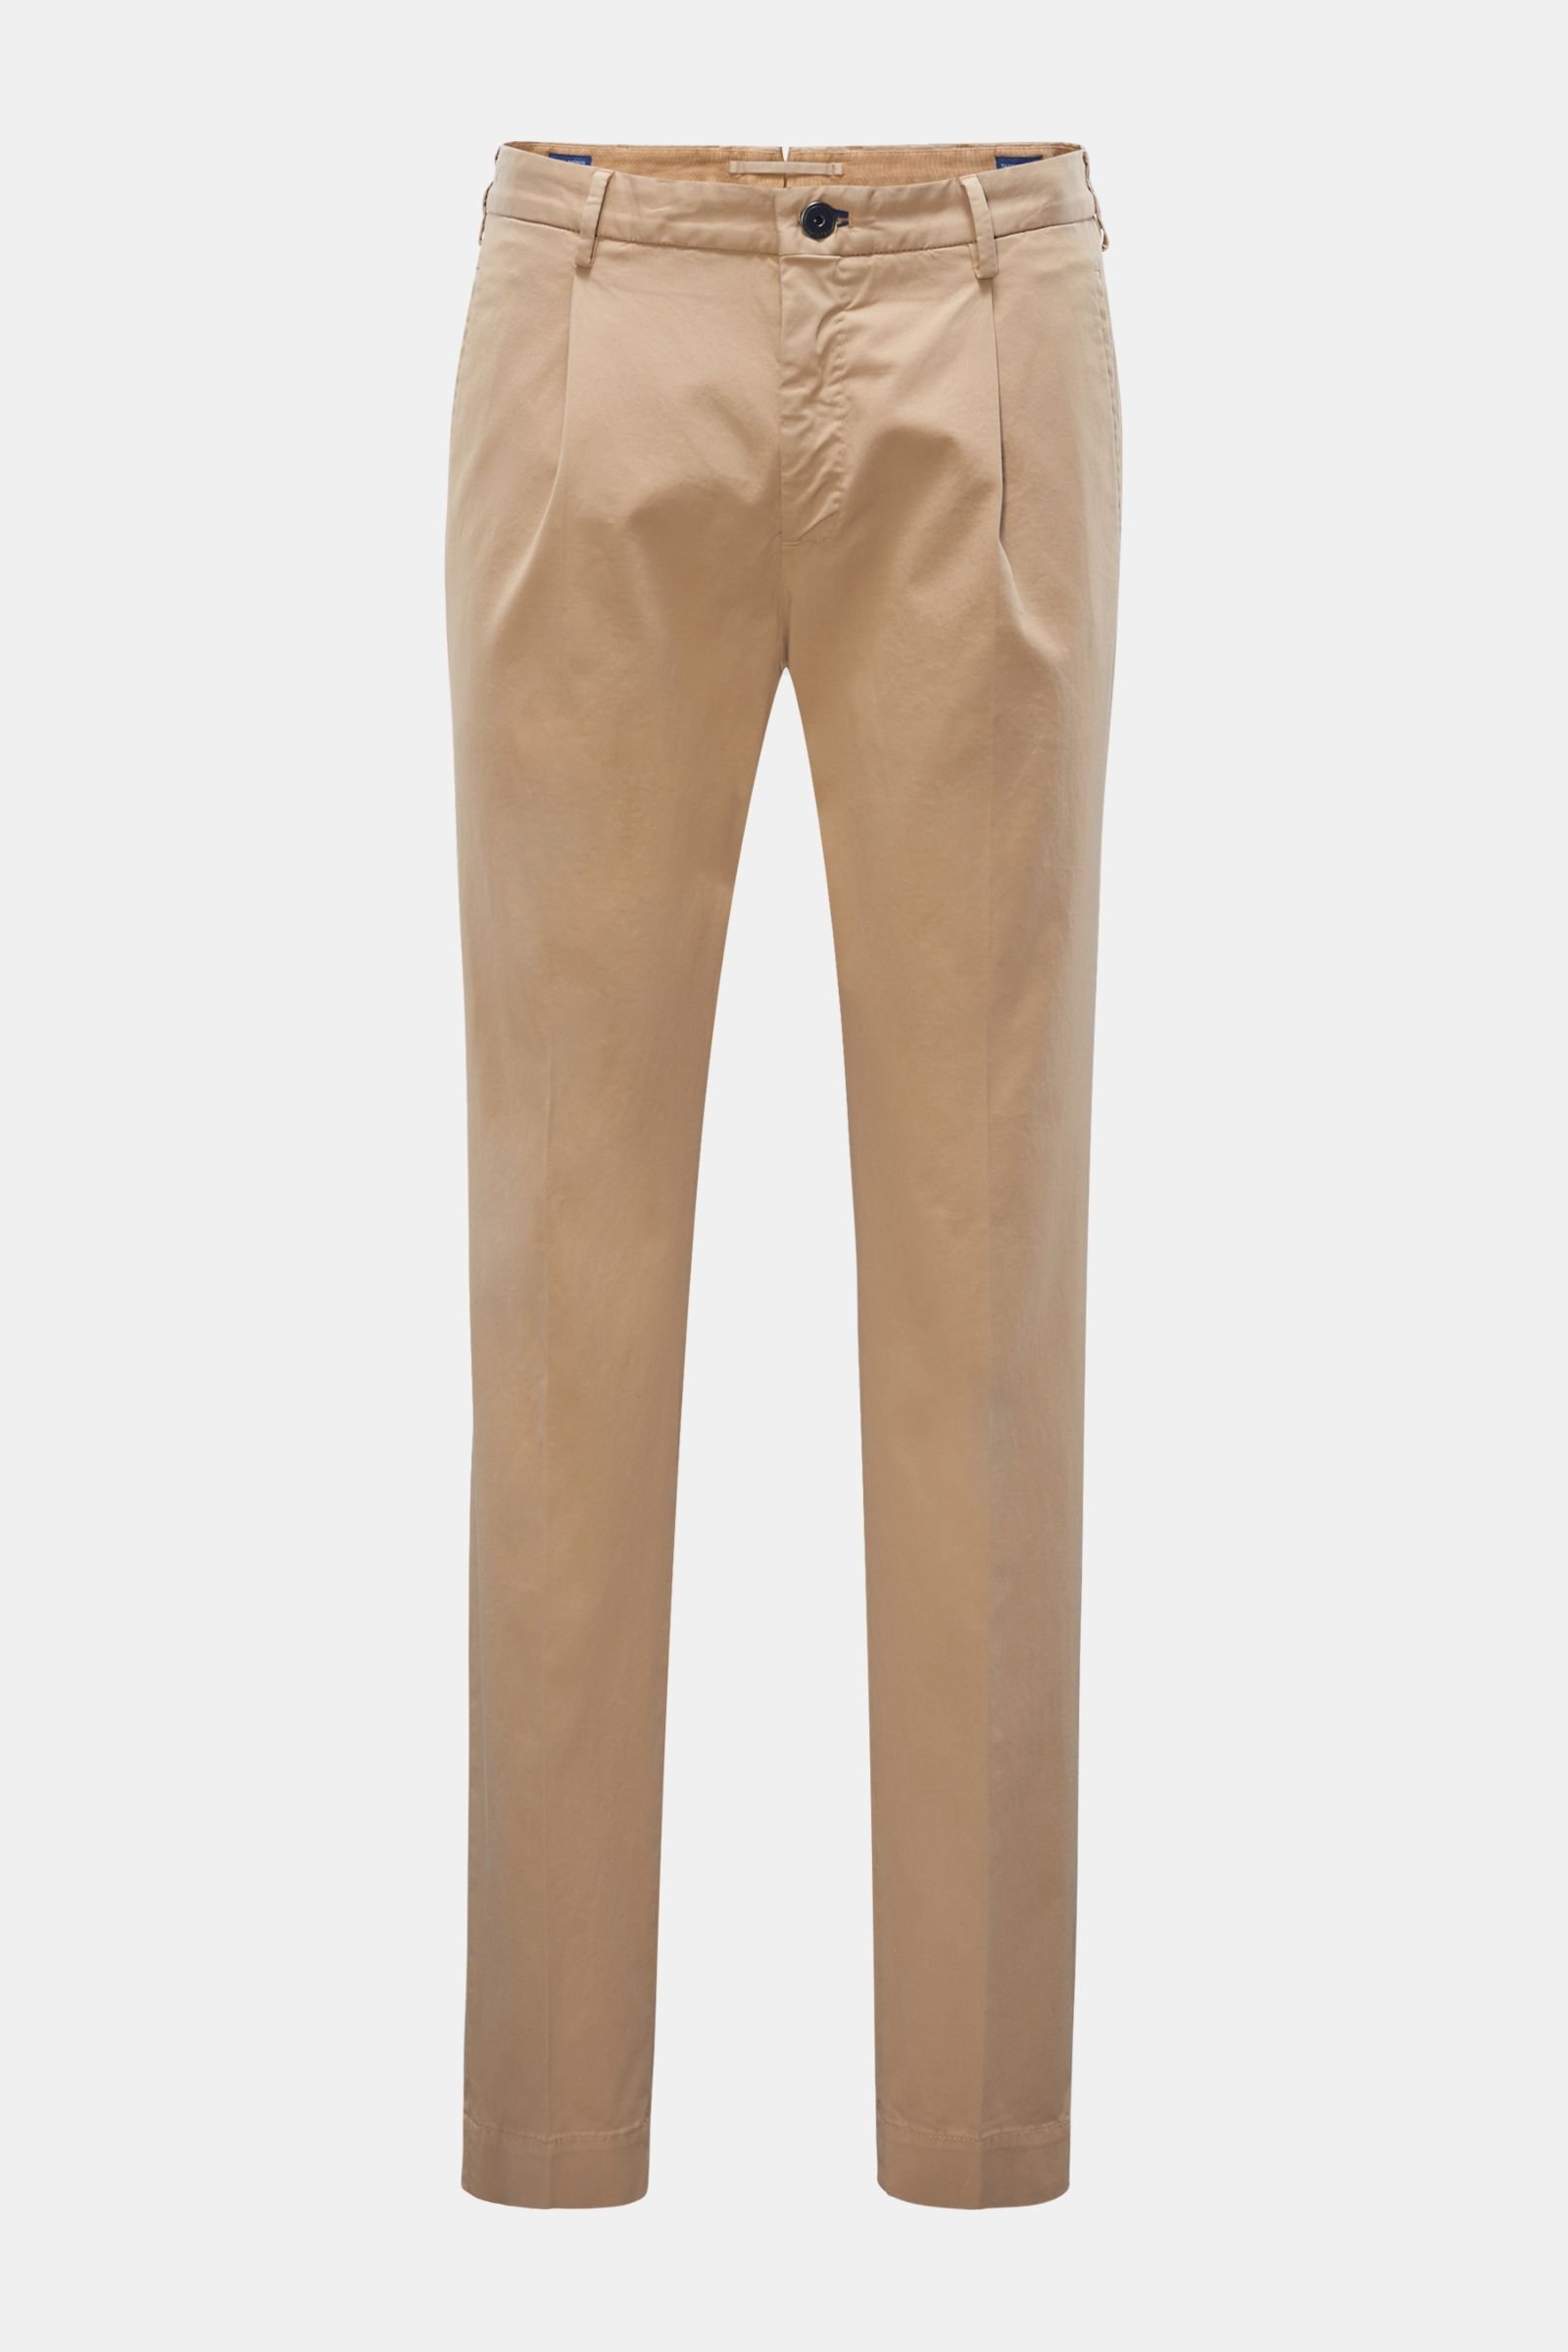 Cotton trousers 'Tapered Fit' light brown